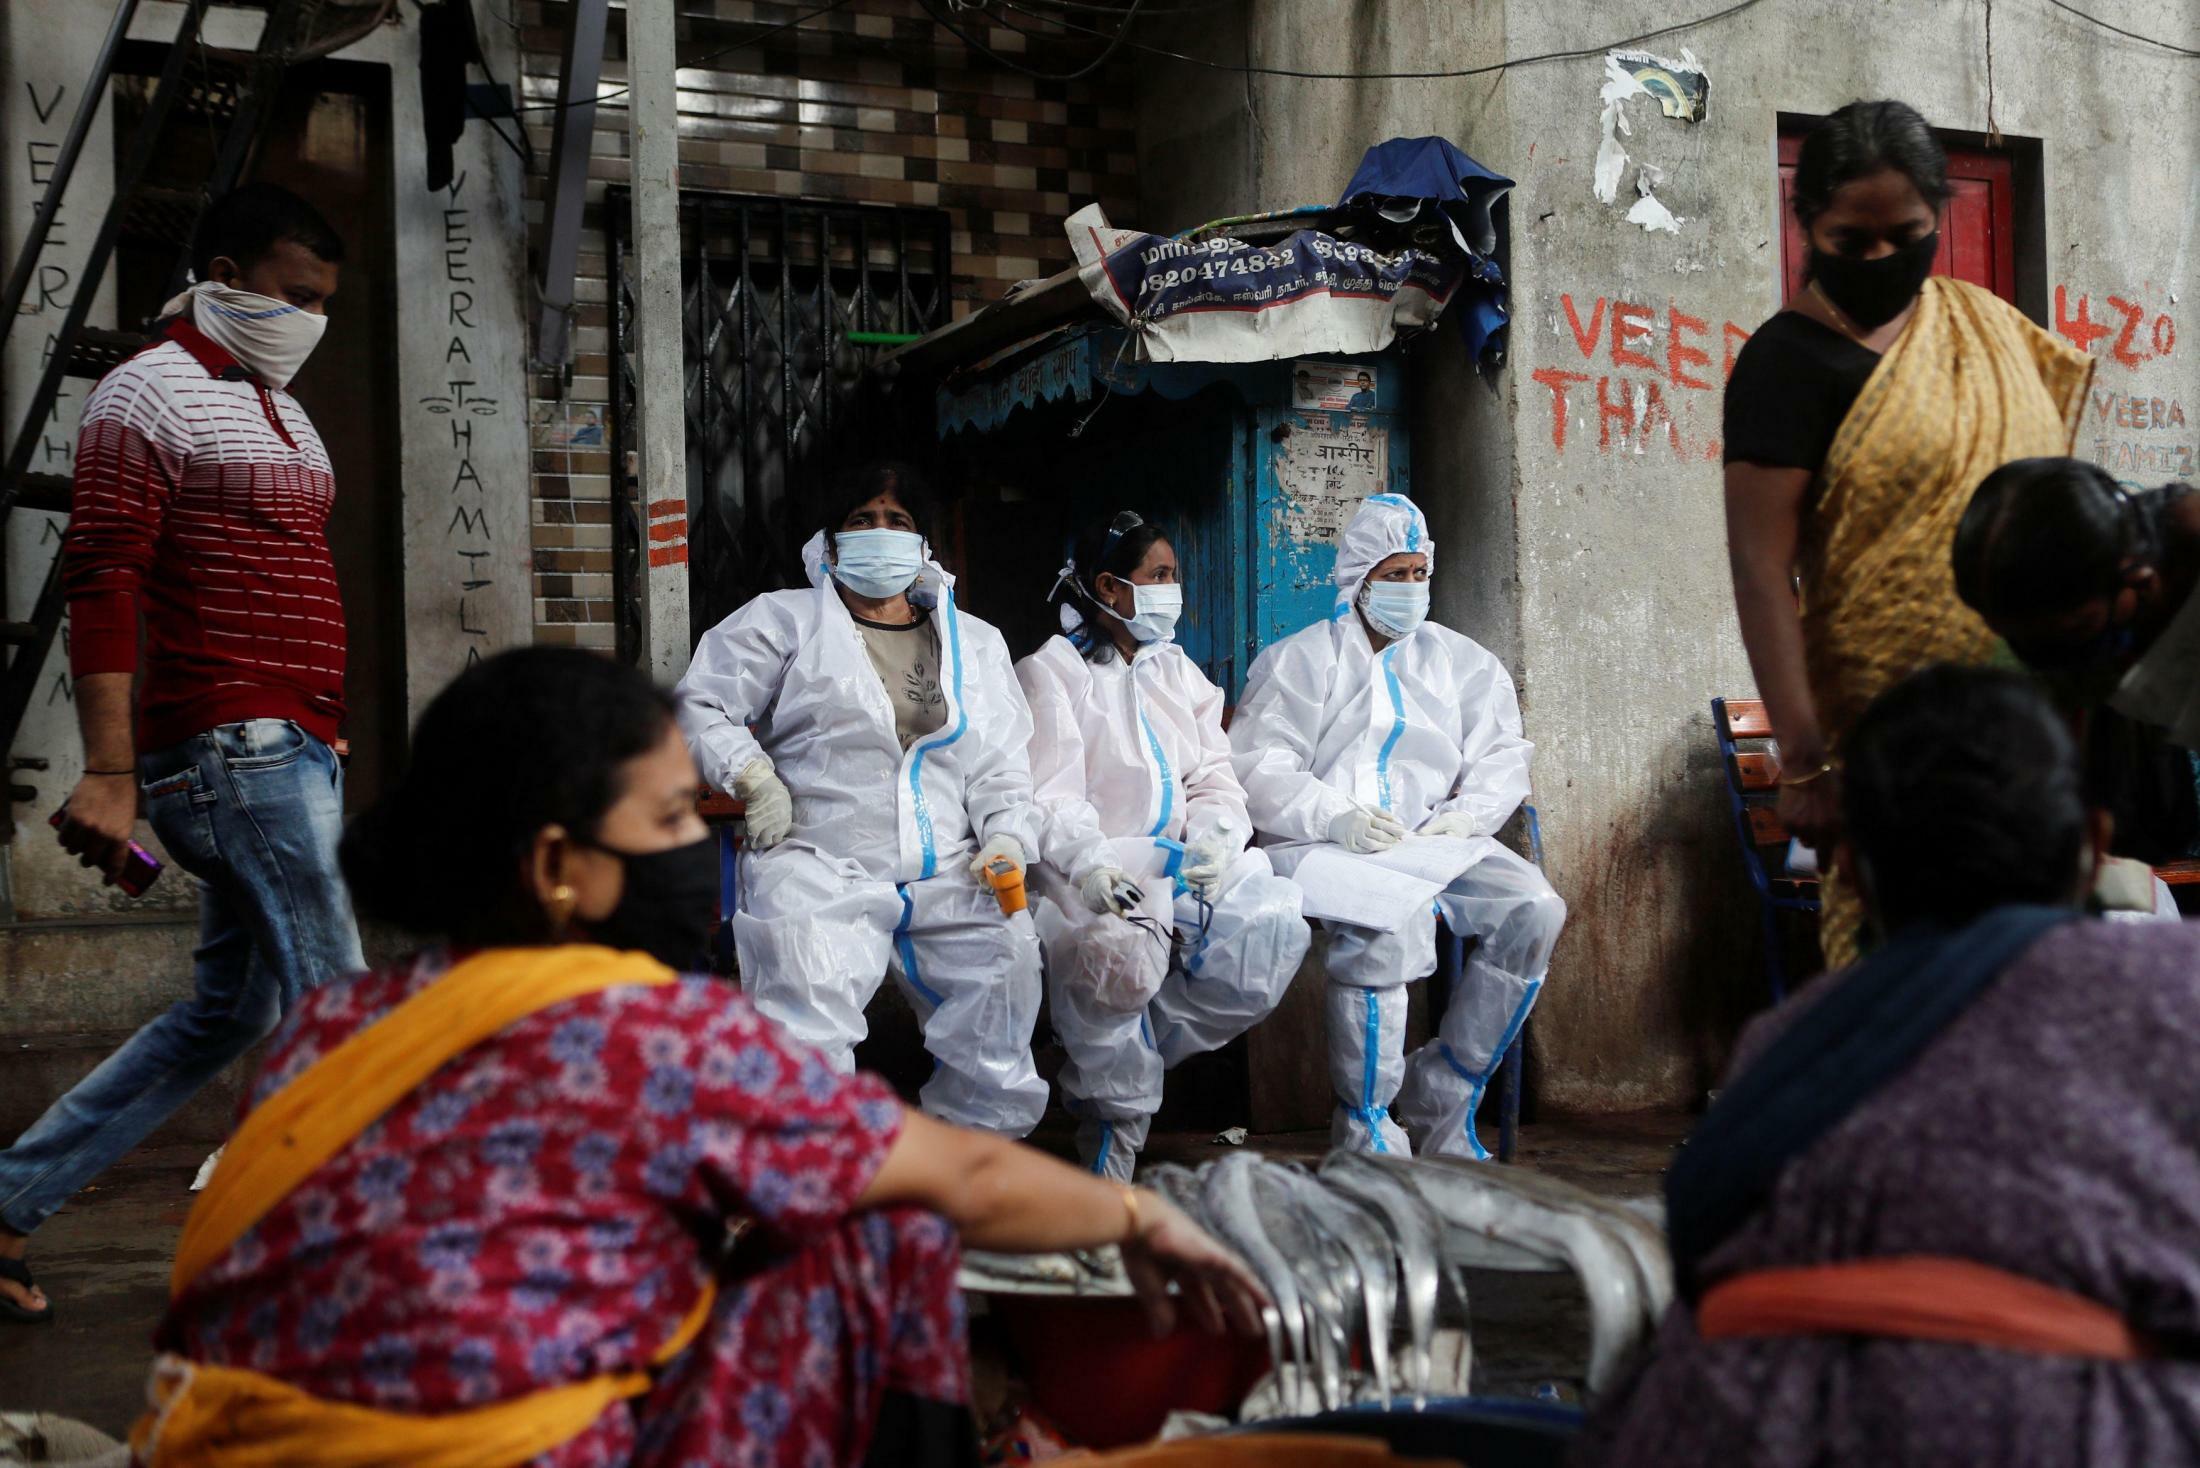 Health workers in personal protective equipment rest during a check up campaign for the coronavirus disease (COVID-19) at a slum area in Mumbai, India, August 3, 2020. REUTERS/Francis MascarenhasREUTERS